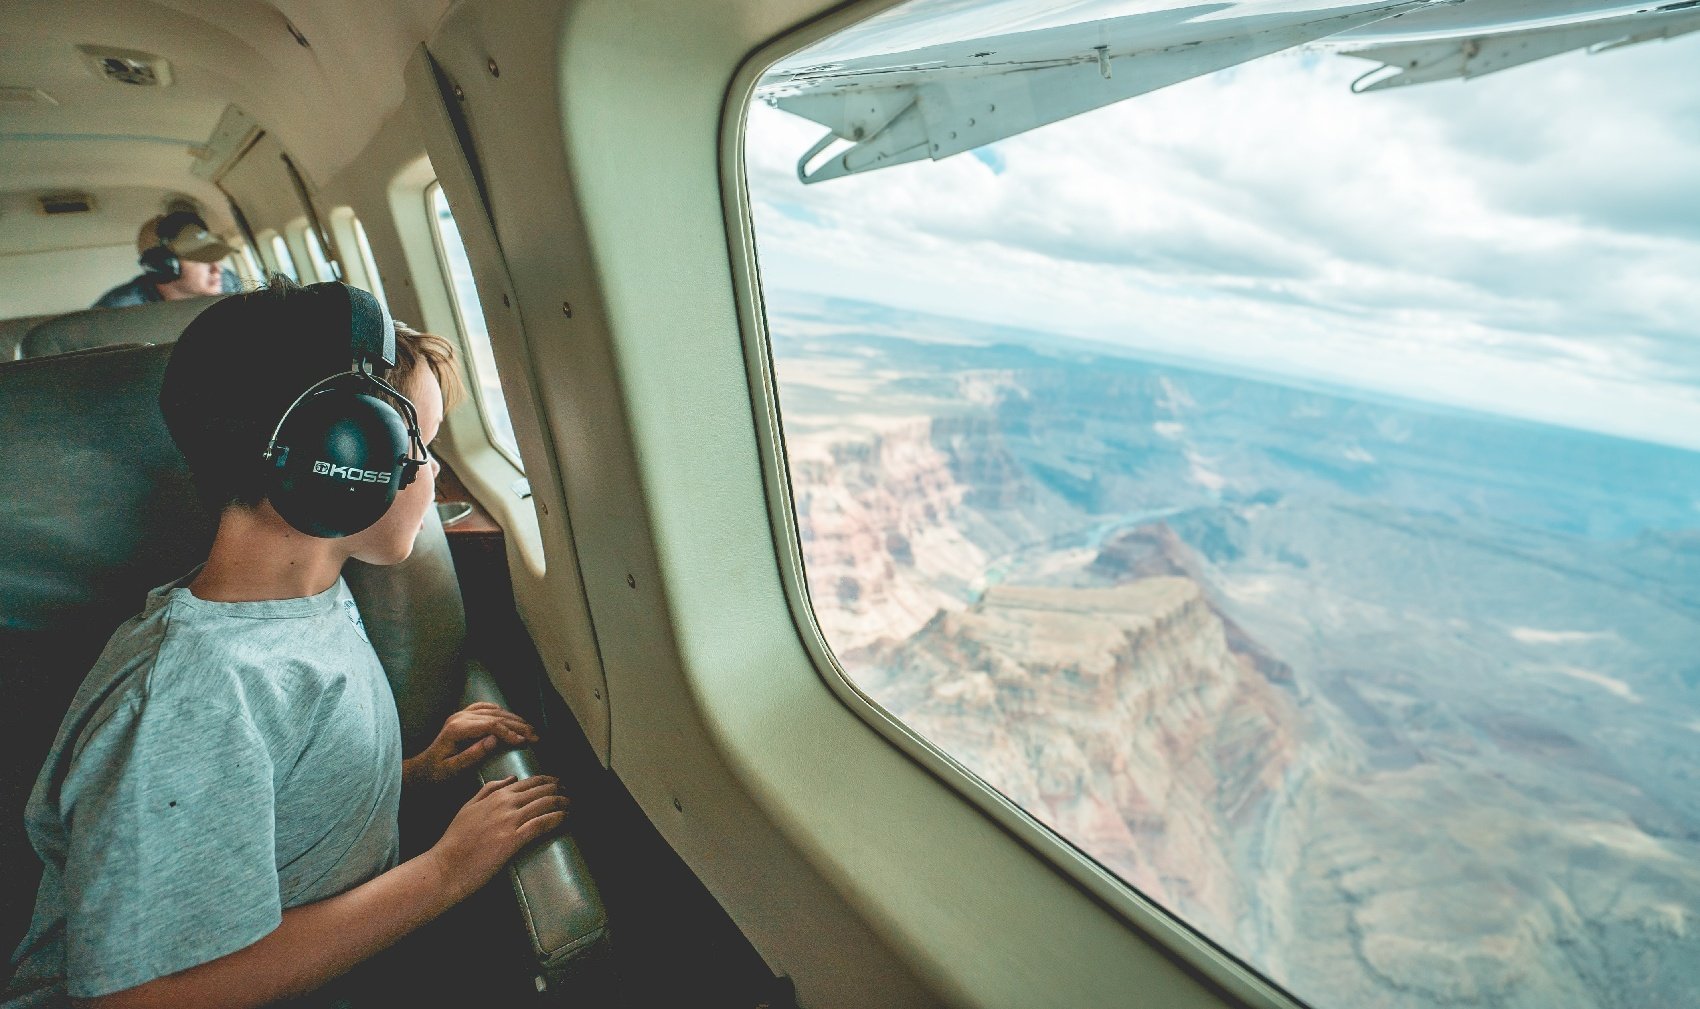 A young boy looks out the window of a general aviation airplane during an aerial tour in Arizona